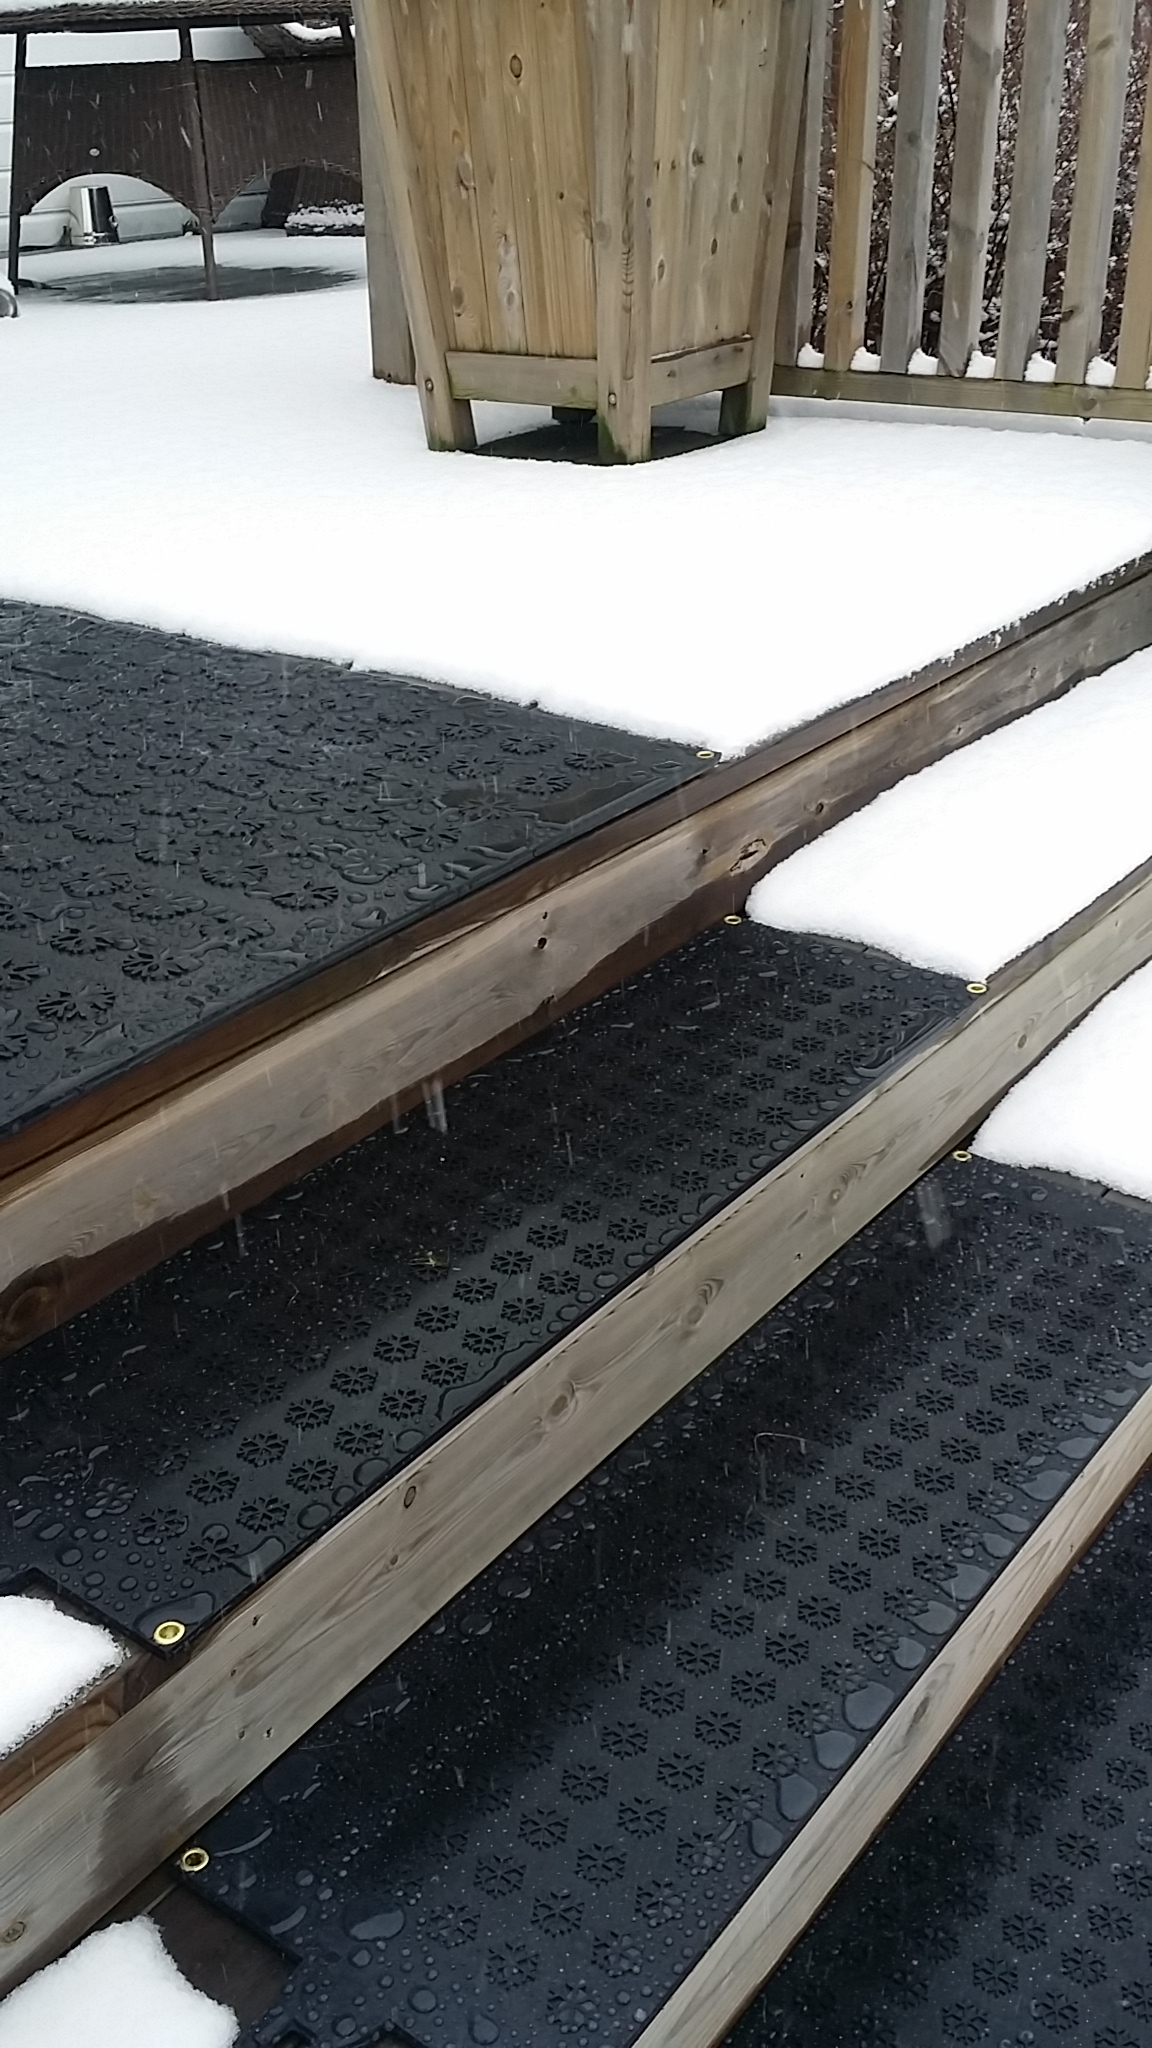 Heated snow melting mats installed on deck steps